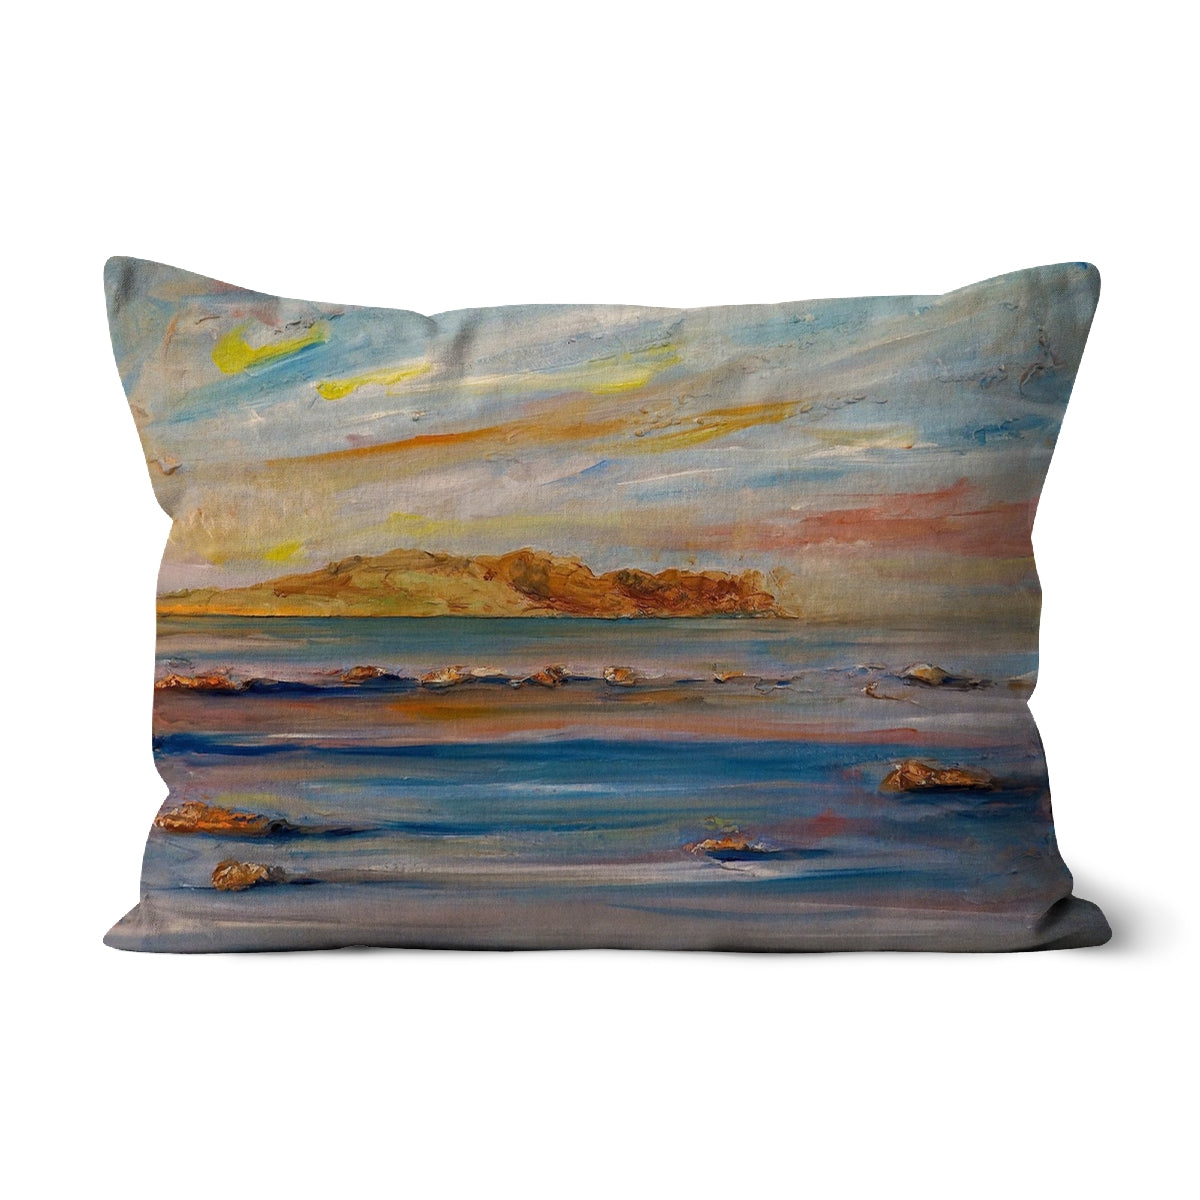 Tiree Dawn Art Gifts Cushion-Cushions-Hebridean Islands Art Gallery-Linen-19"x13"-Paintings, Prints, Homeware, Art Gifts From Scotland By Scottish Artist Kevin Hunter